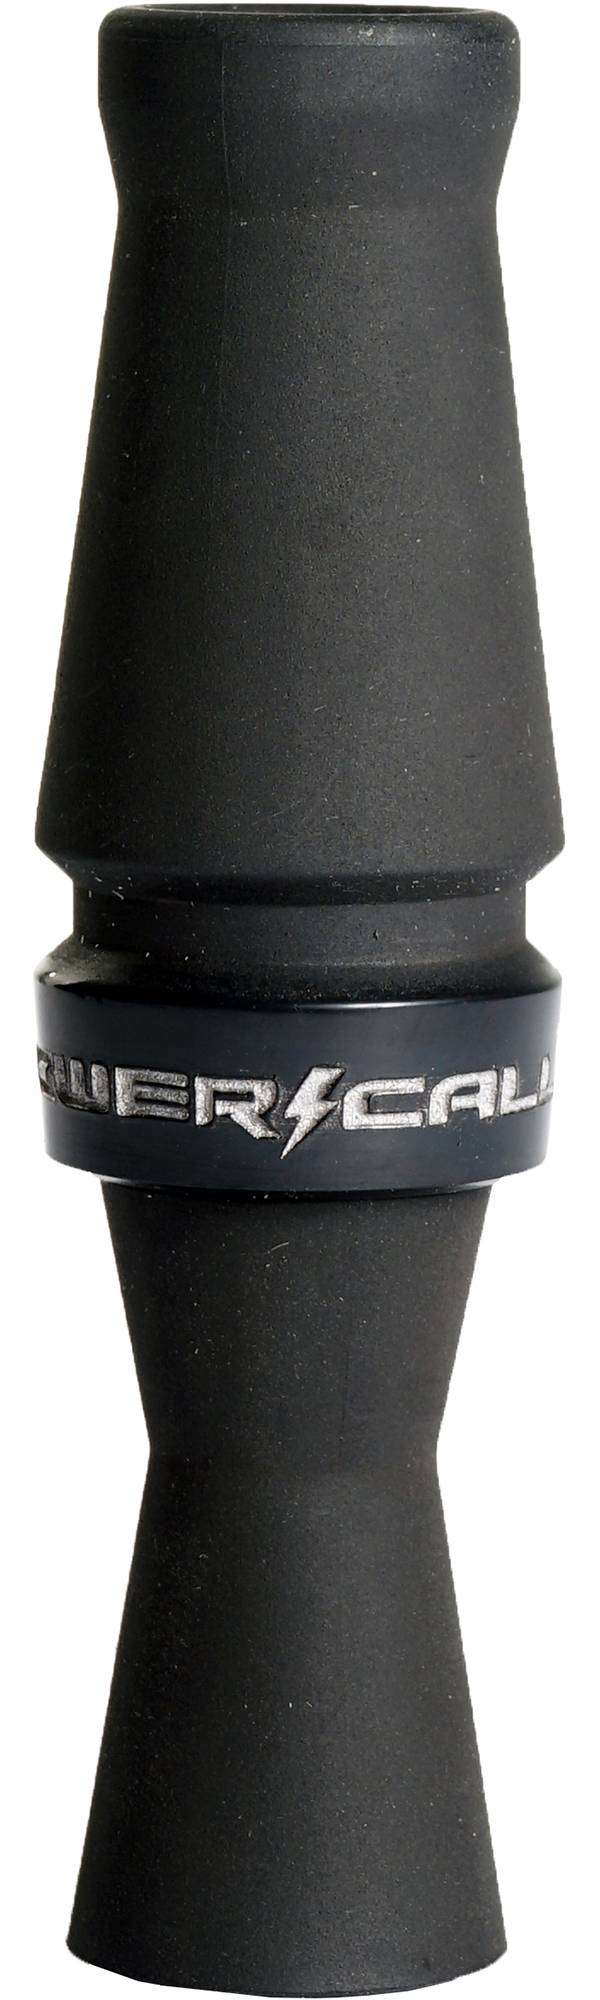 Power Calls Jolt 2 Duck Call product image